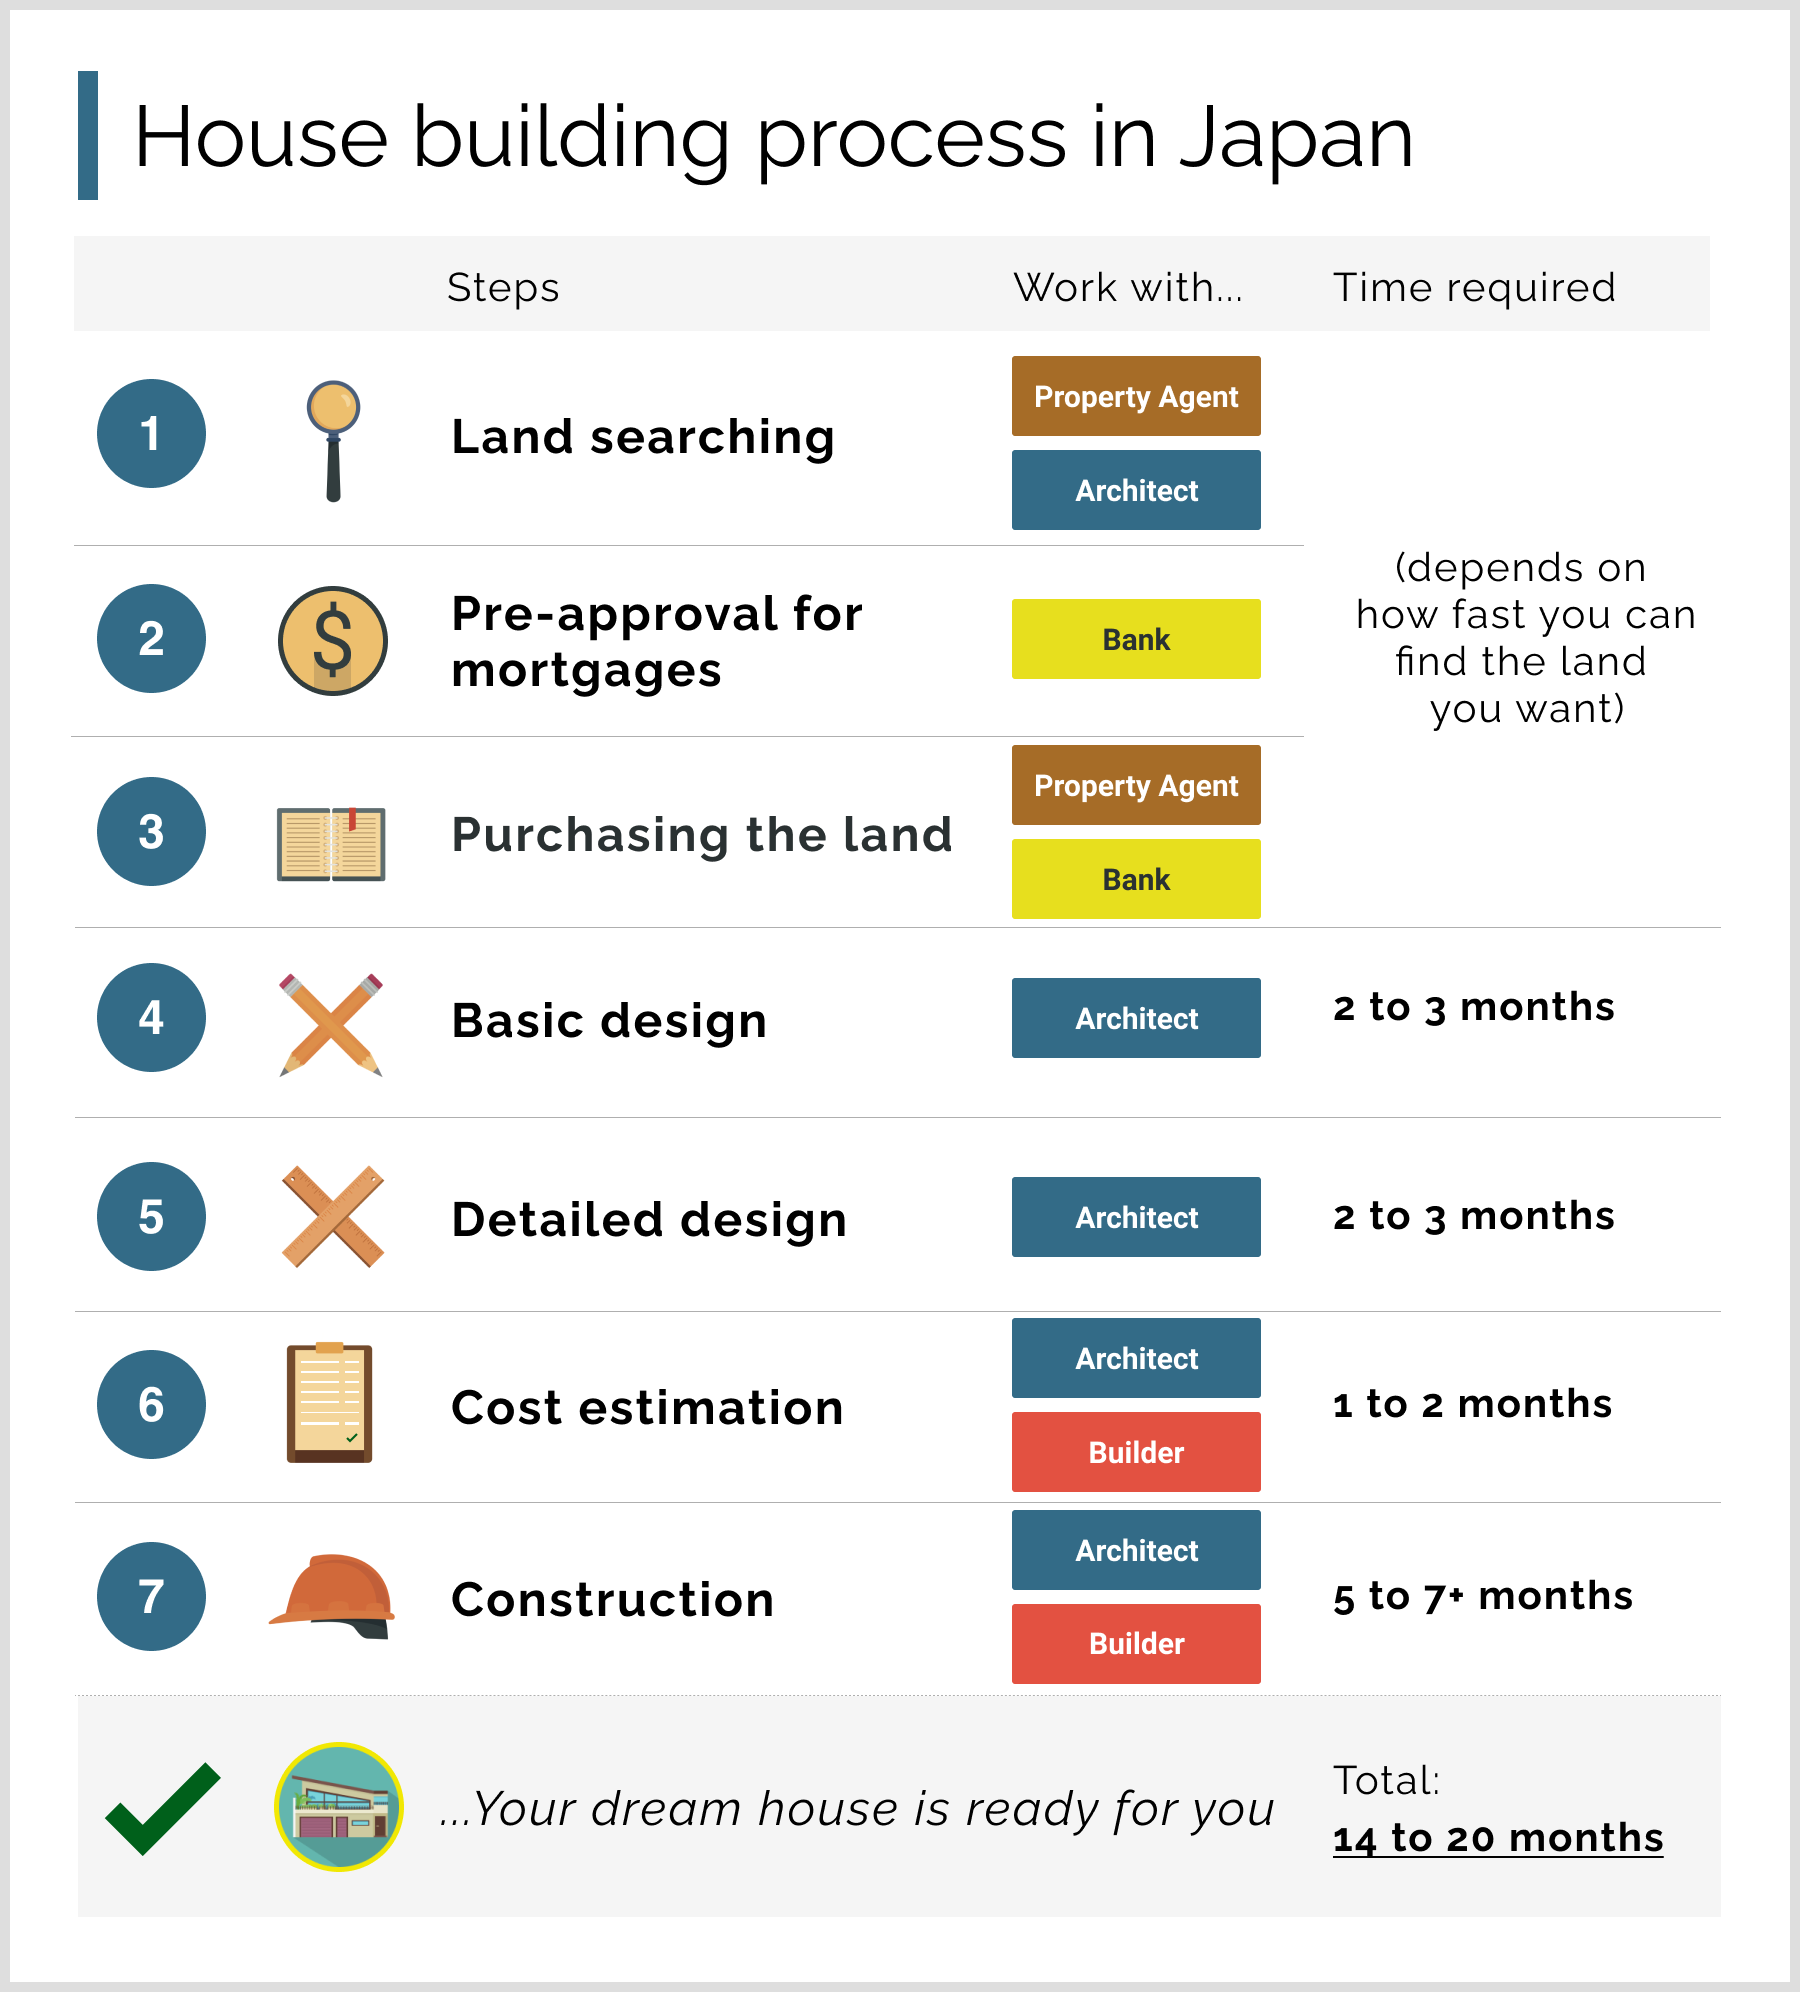 Overview of house building process in Japan